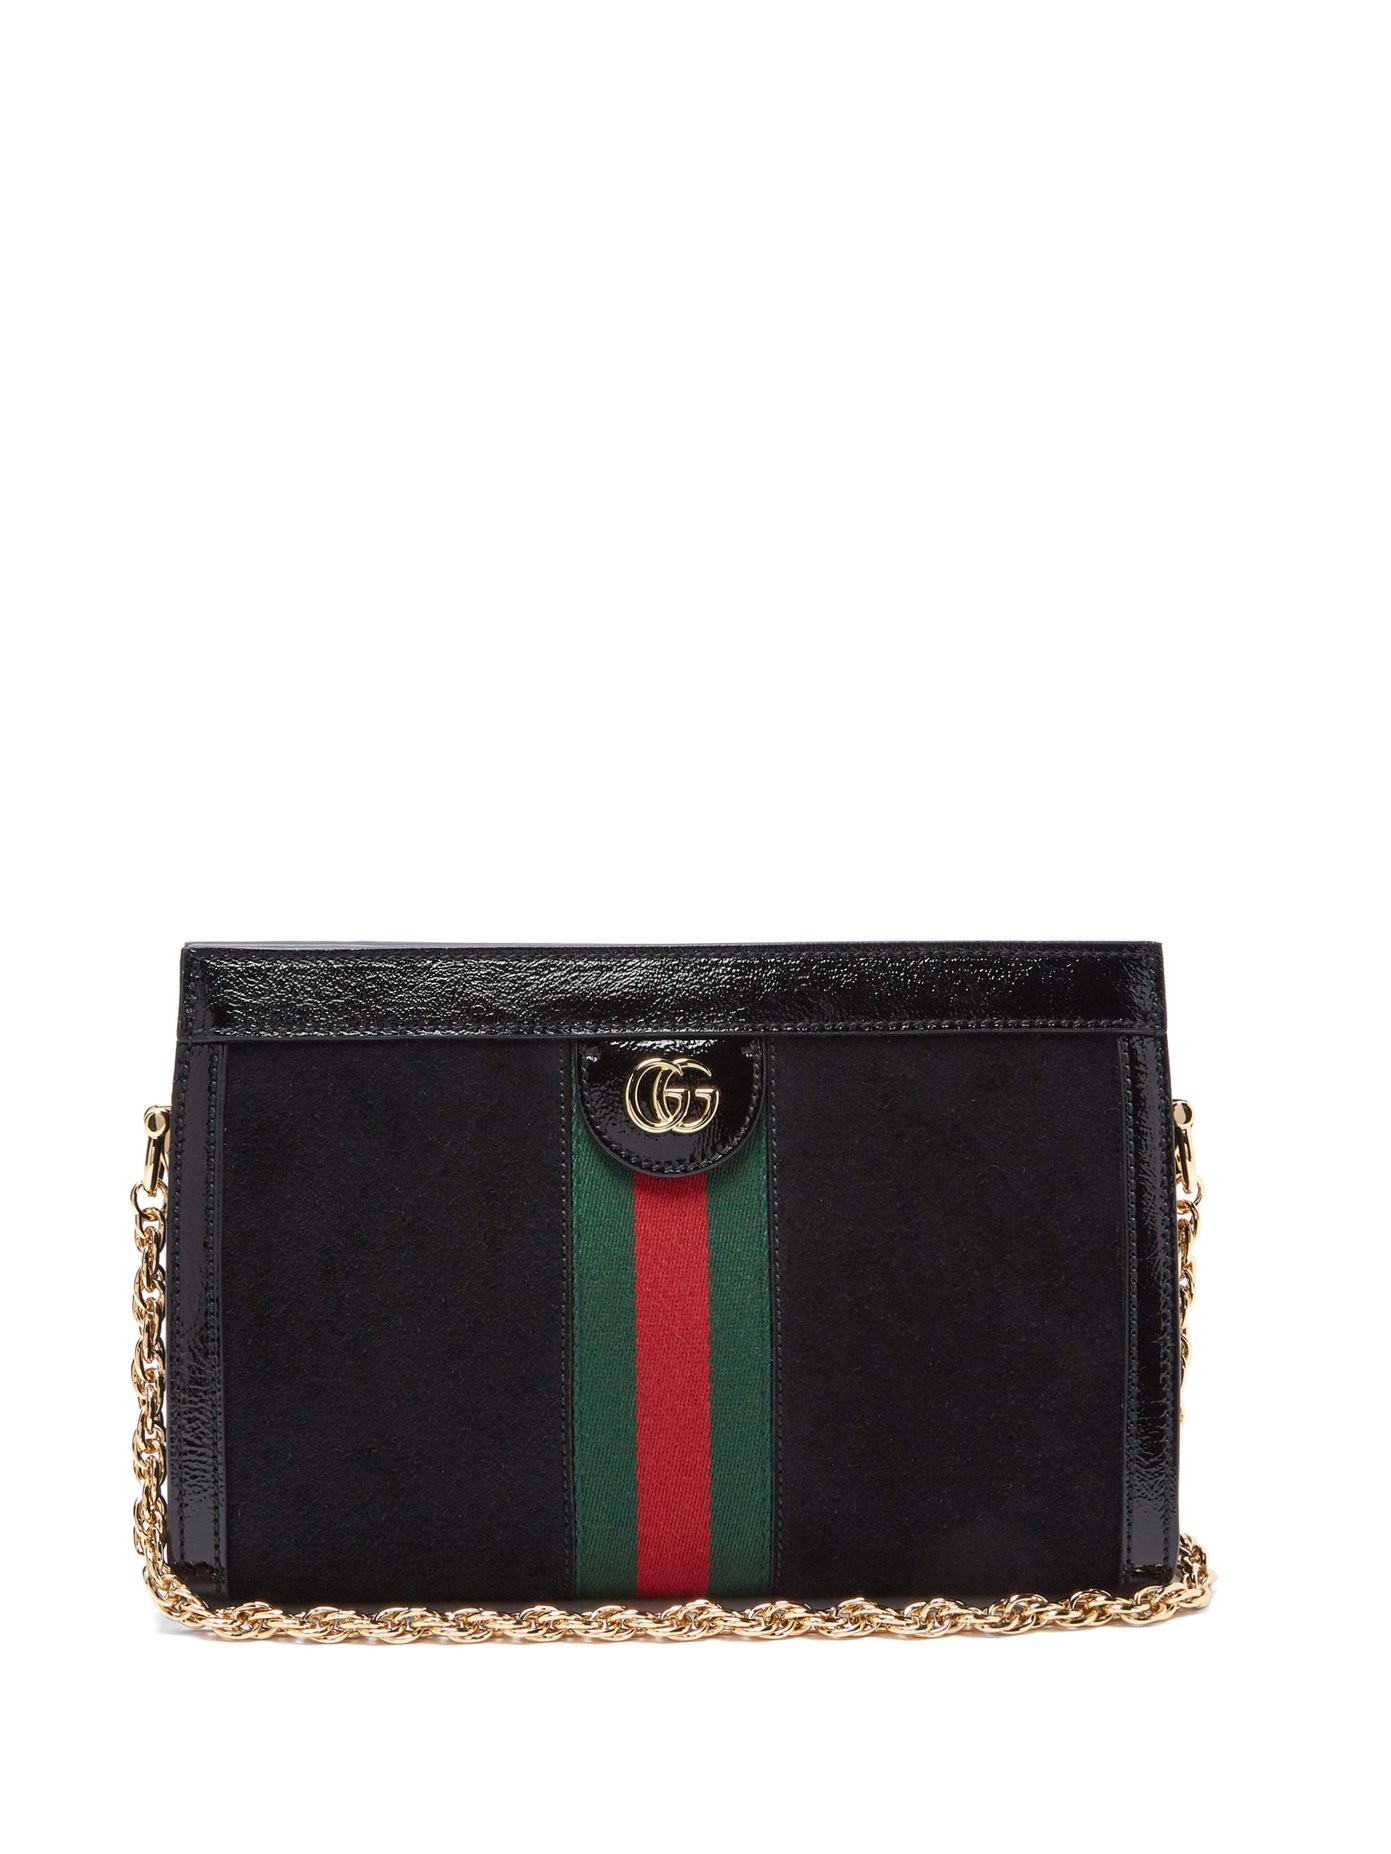 gucci ophidia suede